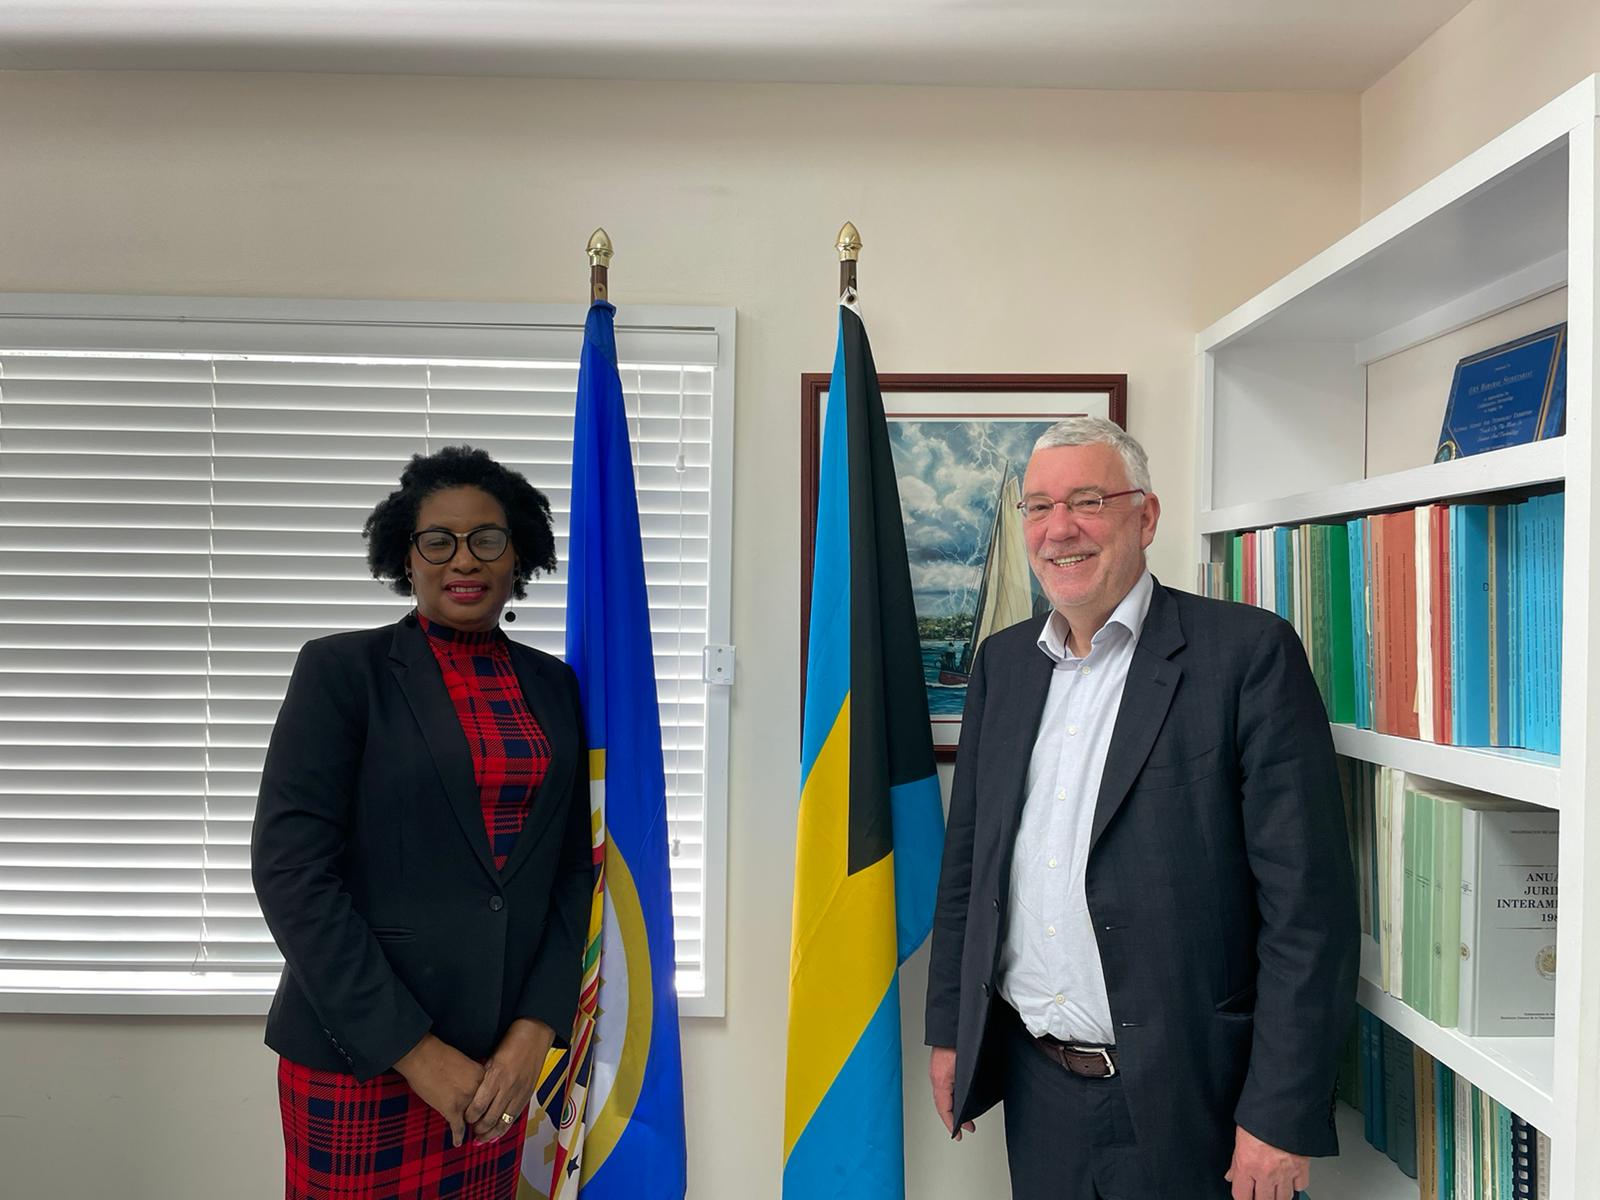 Ambassador Jean-Arthur Régibeau, Ambassador of Belgium to the Commonwealth of The Bahamas, and Permanent Observer for Belgium to the OAS paid a courtesy call to Representative Phyllis Baron at the OAS National Office in The Bahamas during his recent visit.(February 21, 2022)